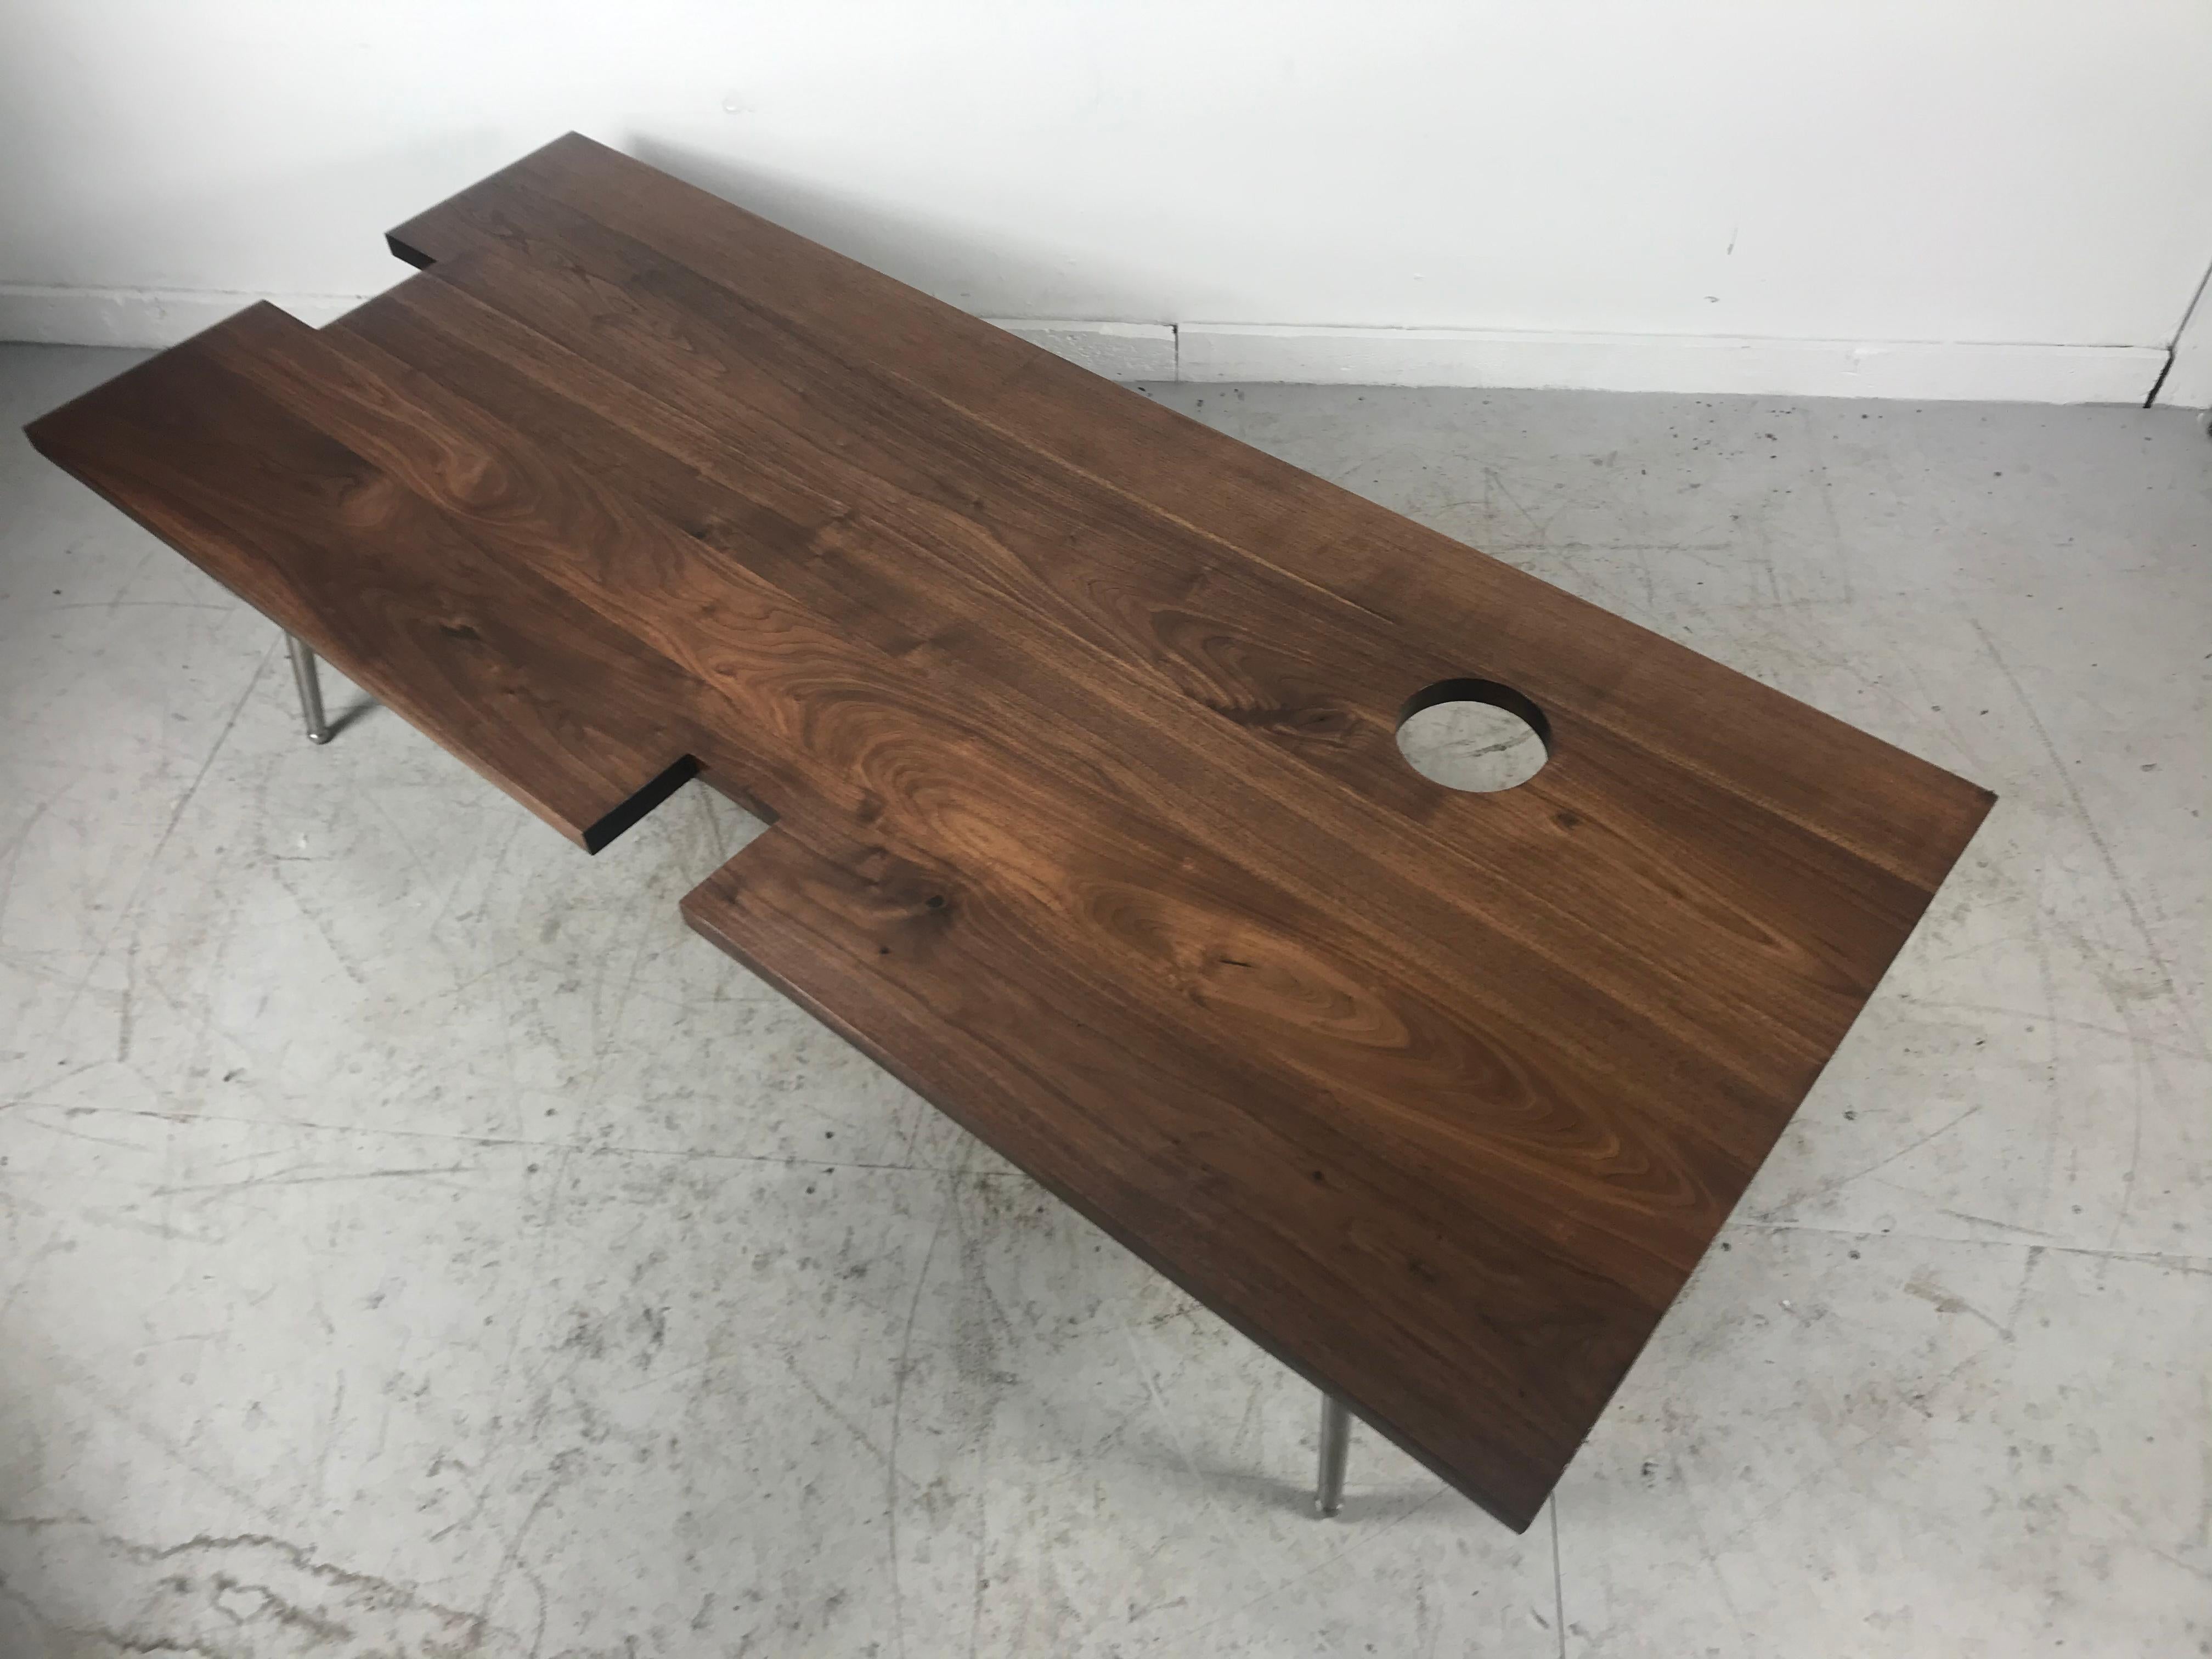 Modernist Bespoke Walnut Coffee/Cocktail Table Designed by John Tracey 1